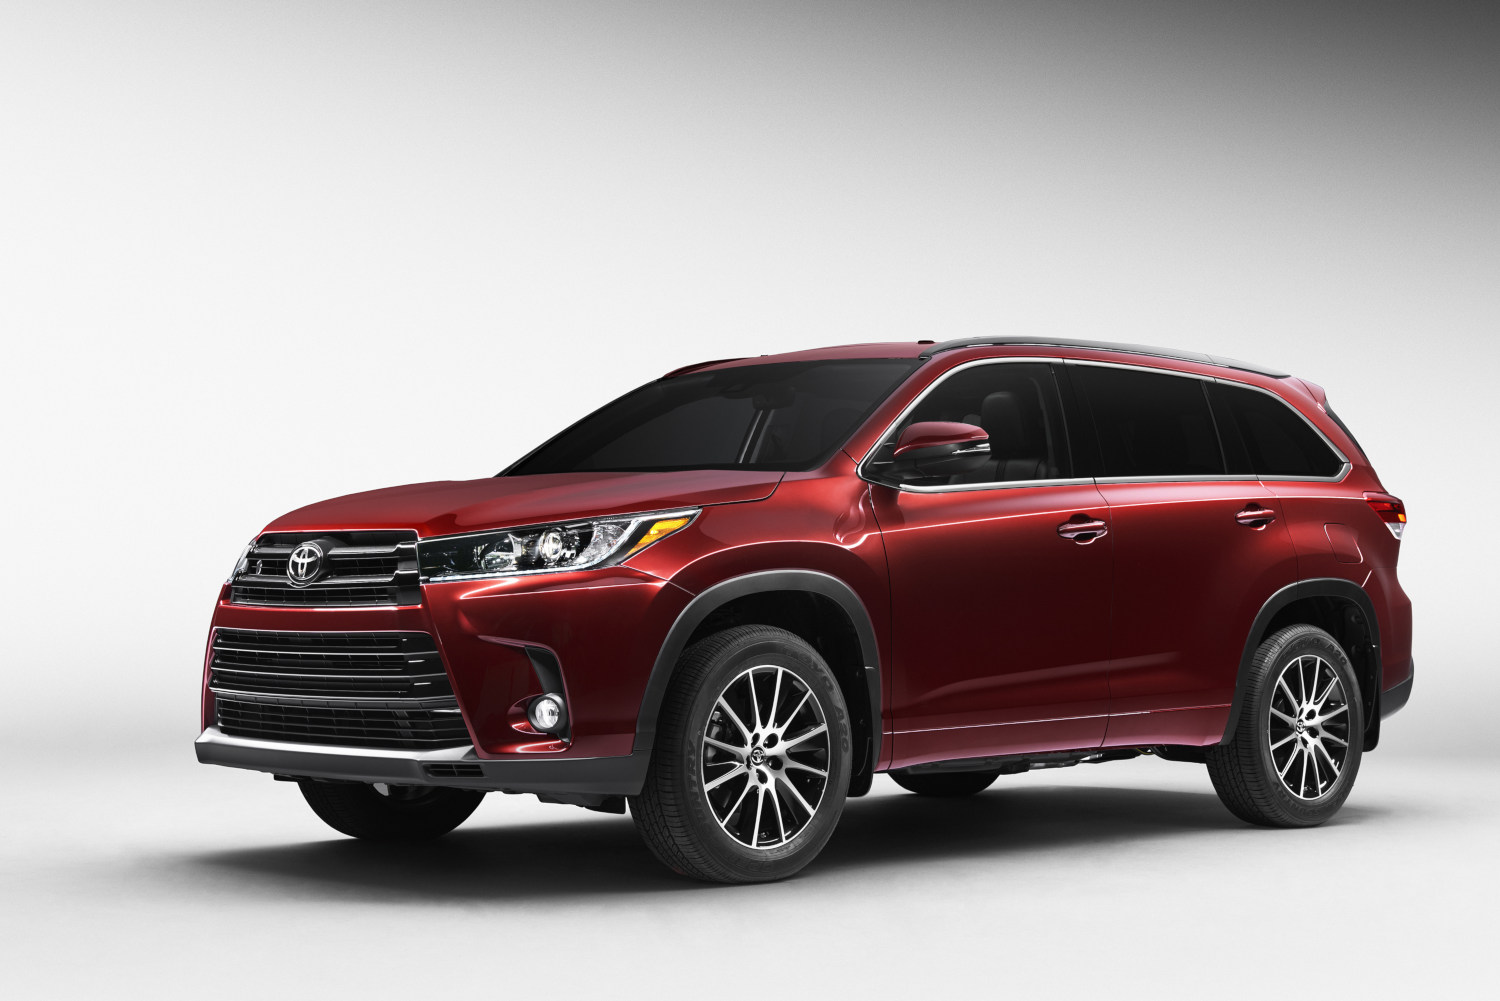 The best used SUVs for teens include this 2016 Toyota Highlander